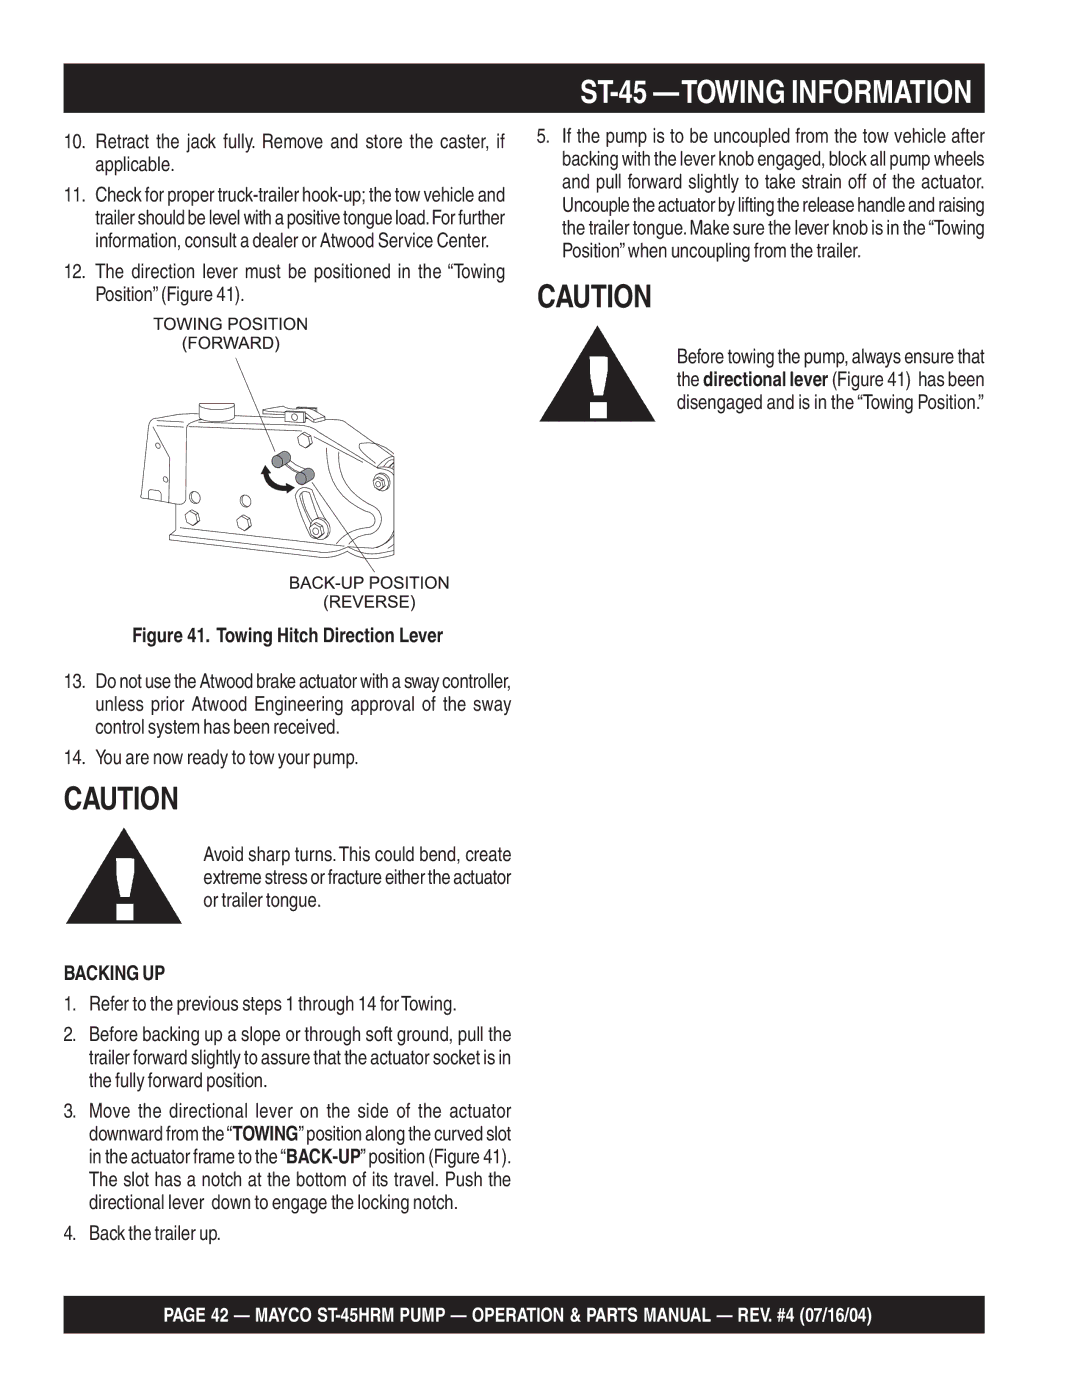 Multiquip ST-45HRM manual ST-45 -TOWING Information, Backing UP, Back the trailer up 